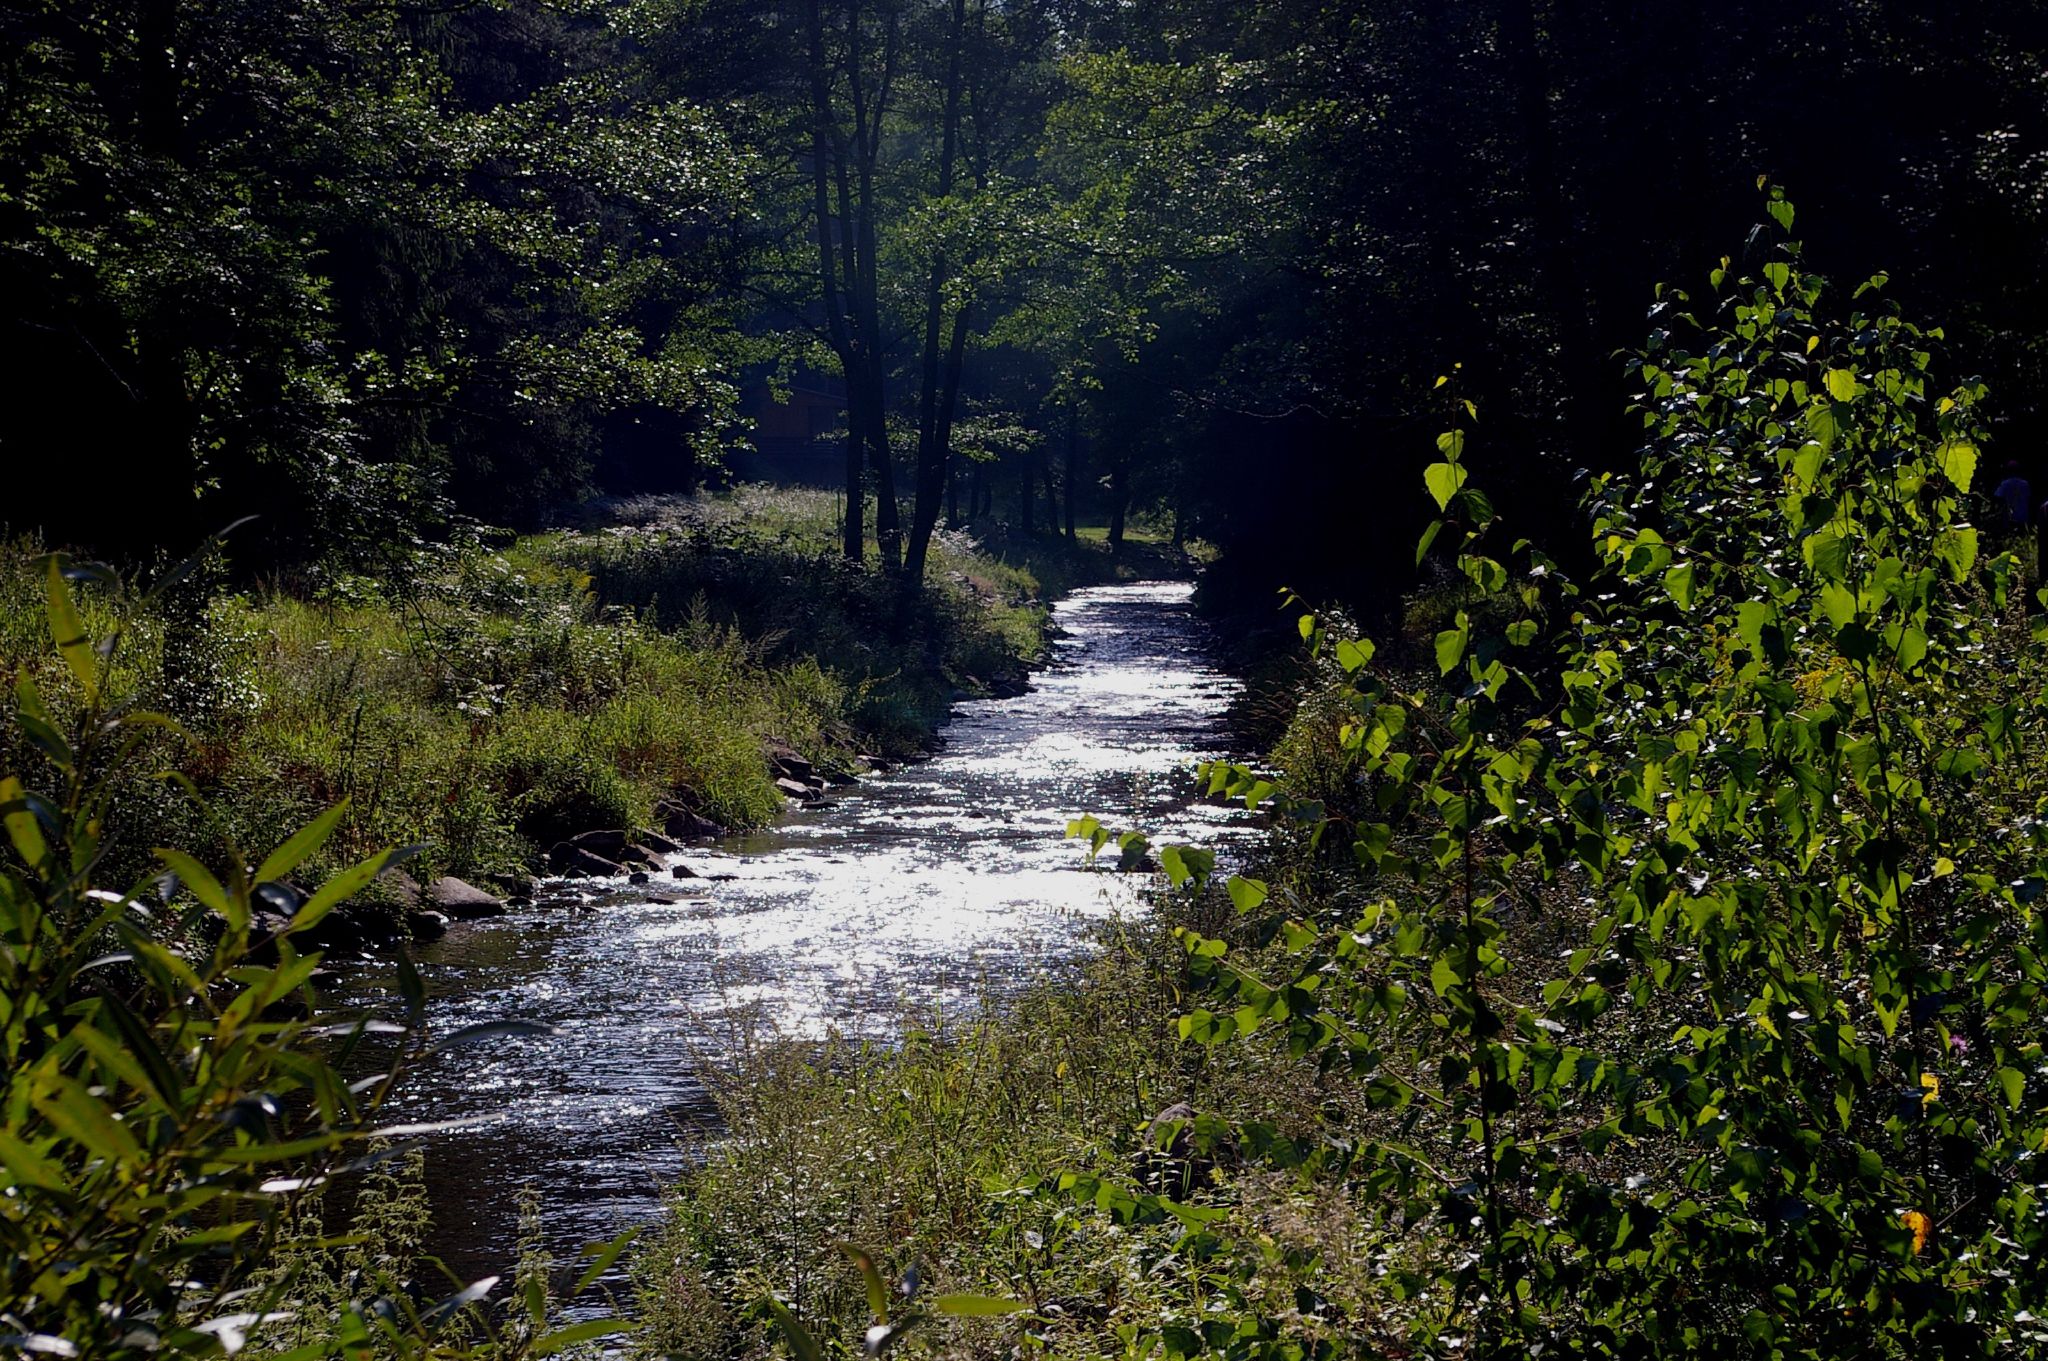 stream of water surrounded by vegetation near some trees